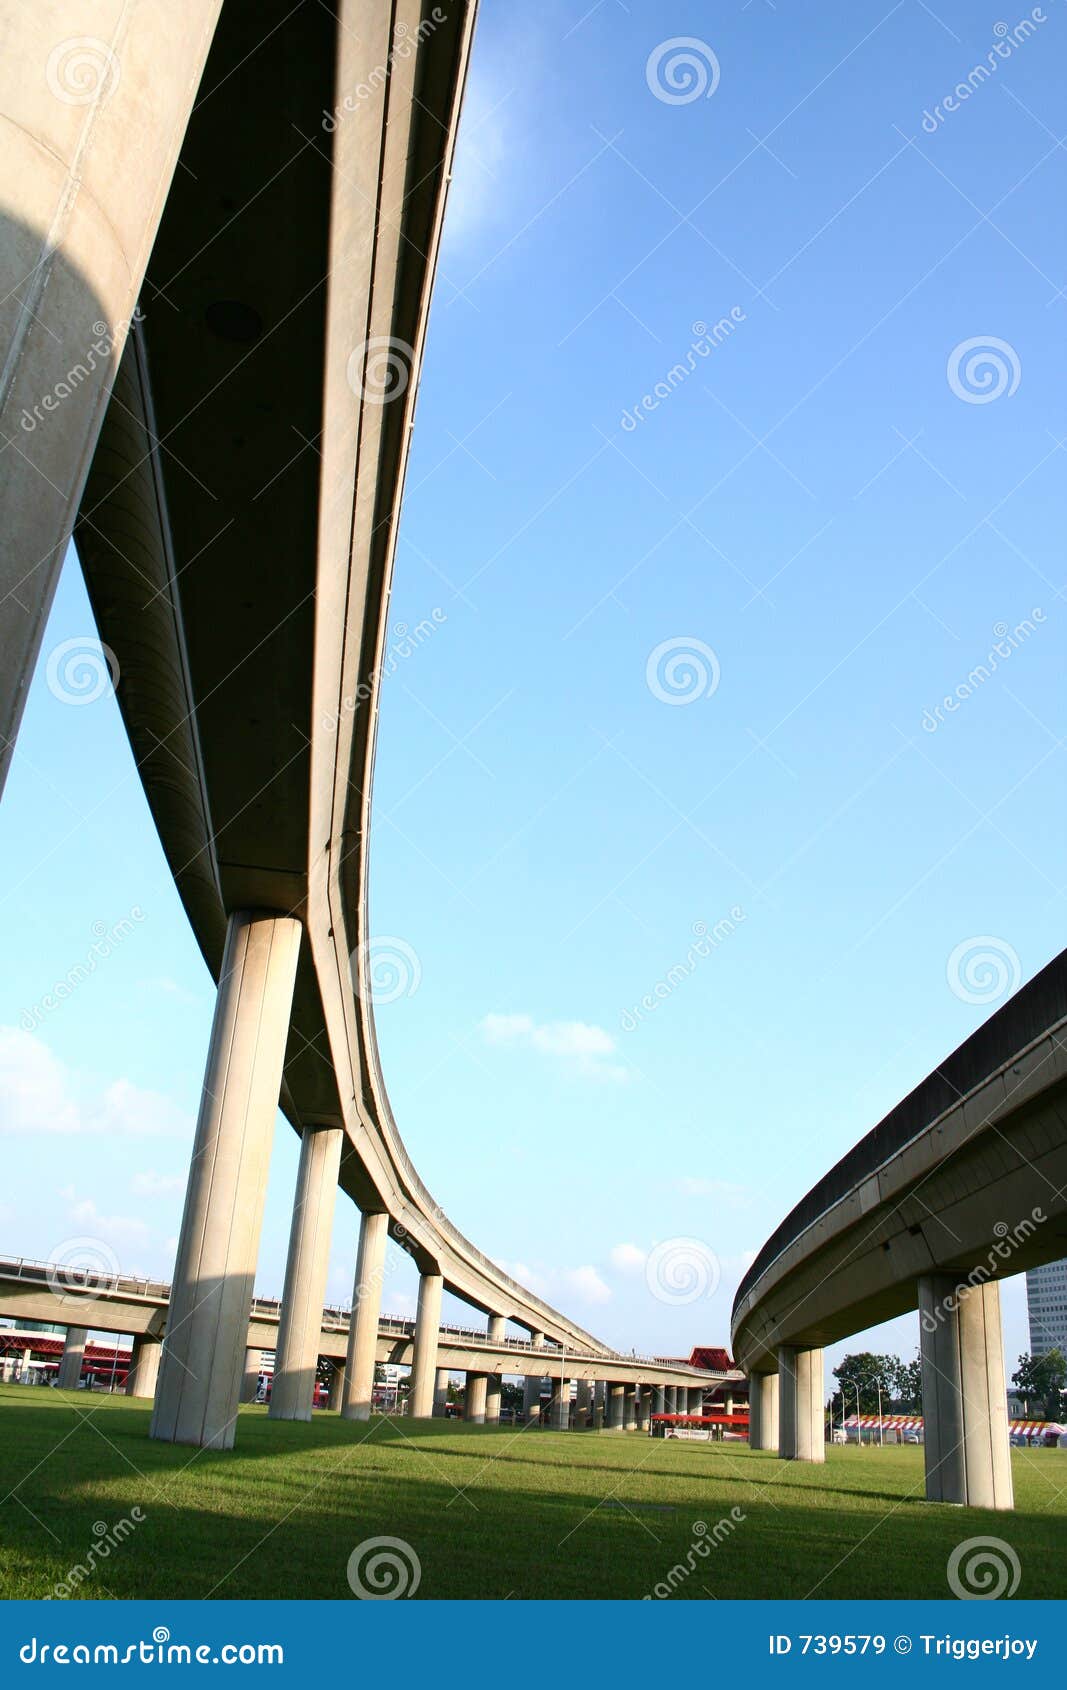 Highway intersections stock image. Image of city, urban - 739579